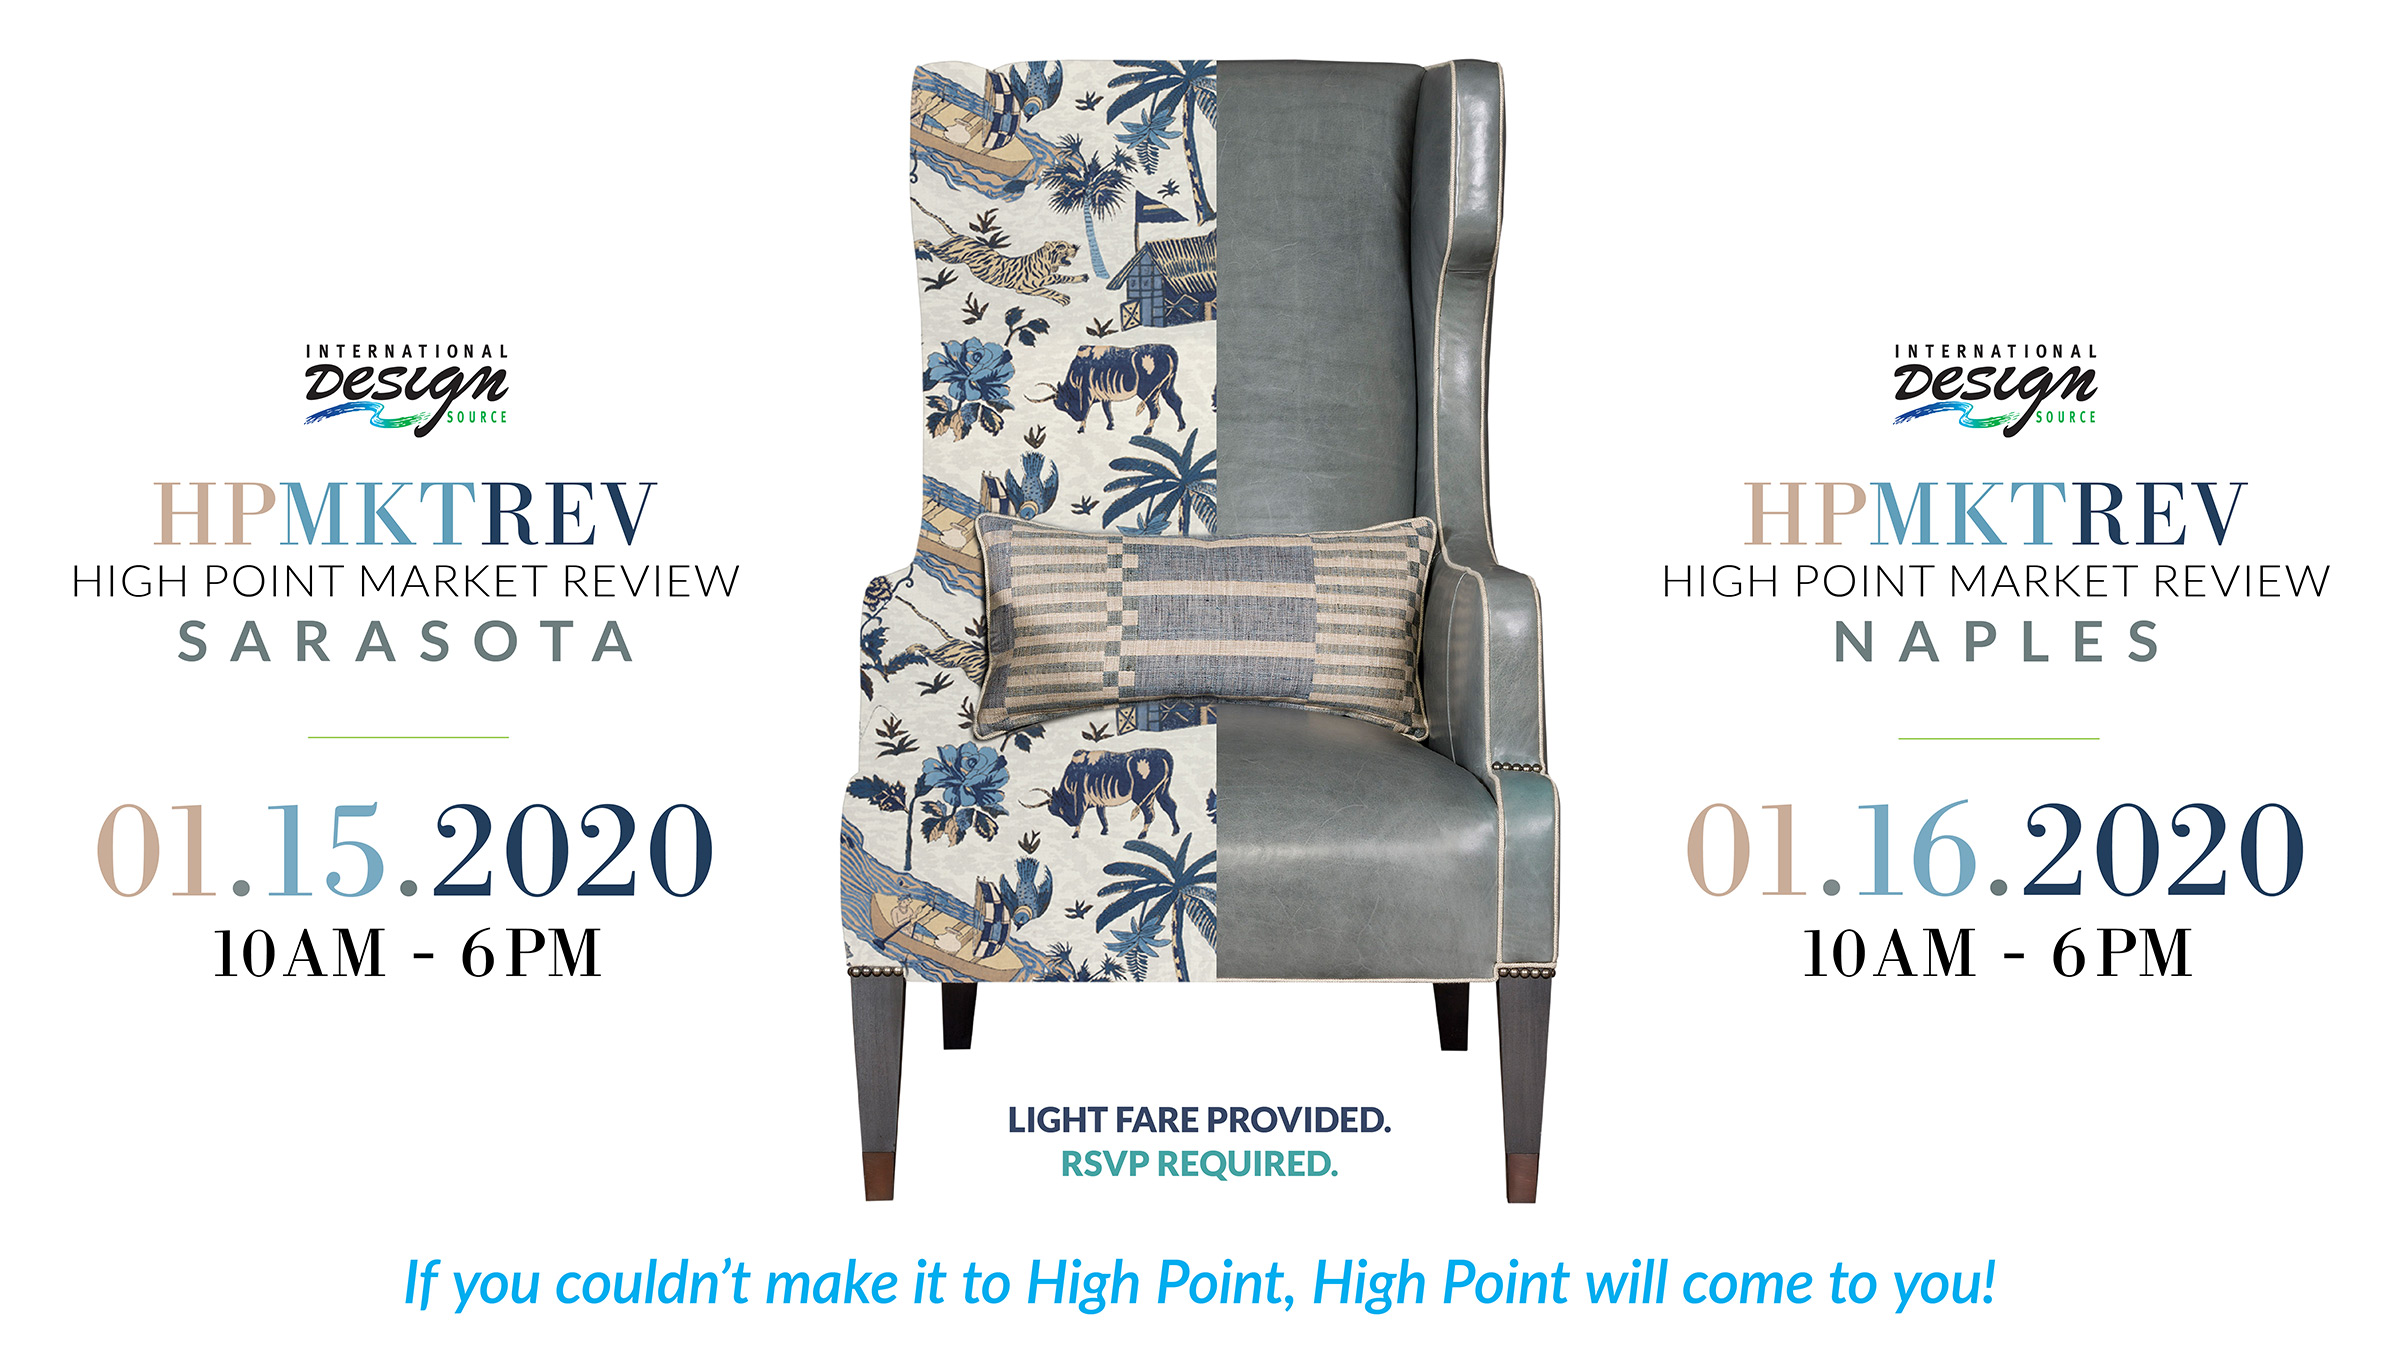 High Point Market Review at IDS --January 15+16, 2020